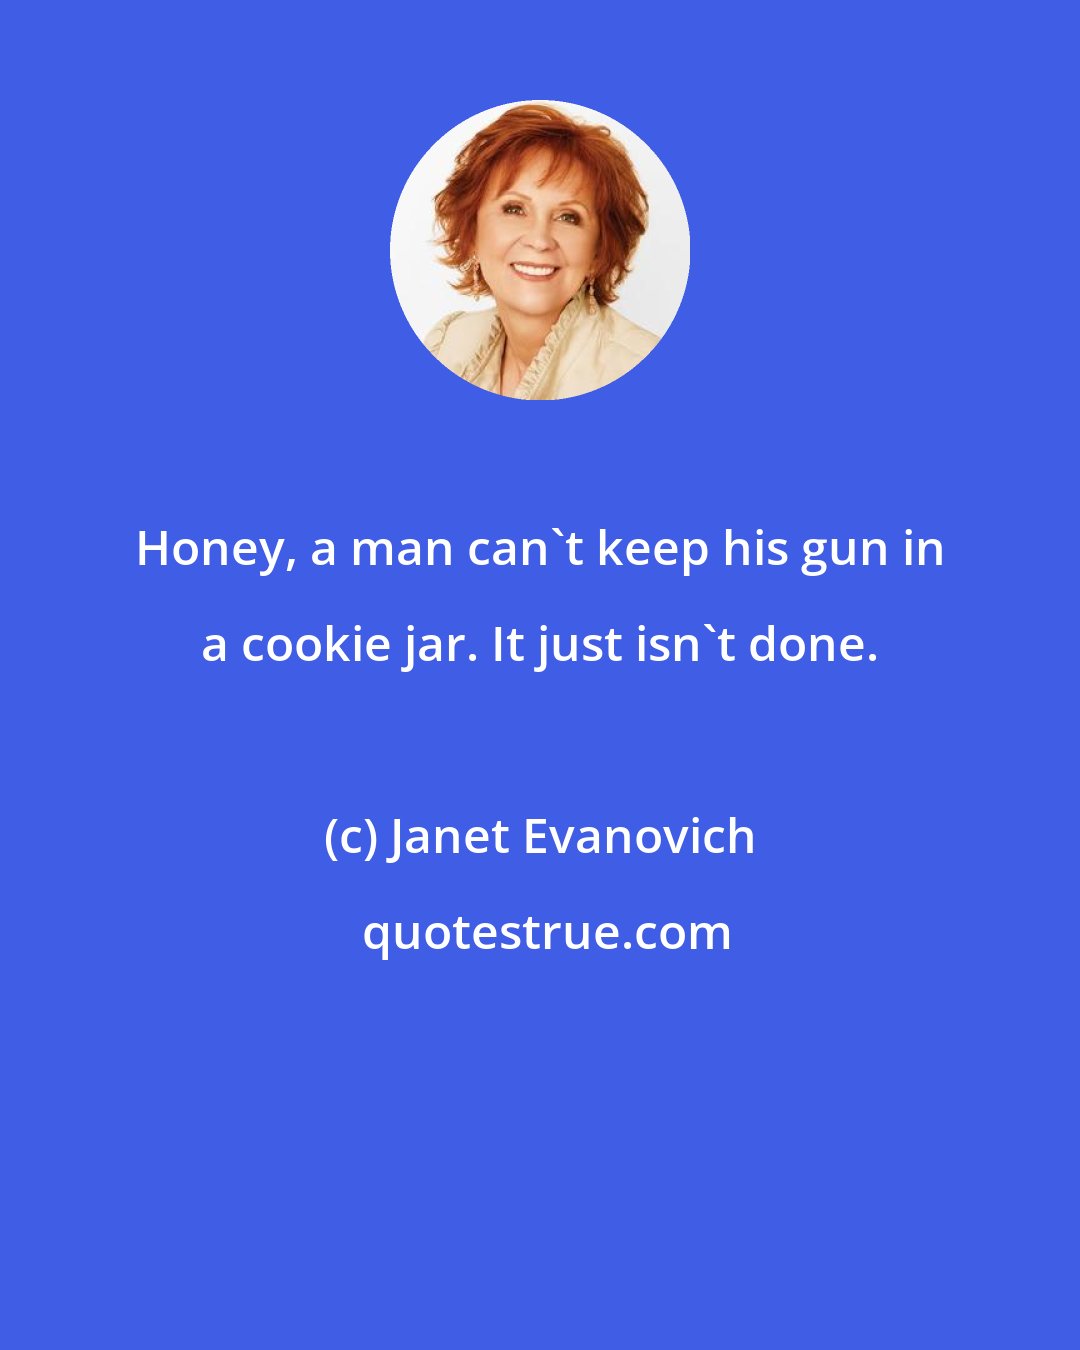 Janet Evanovich: Honey, a man can't keep his gun in a cookie jar. It just isn't done.